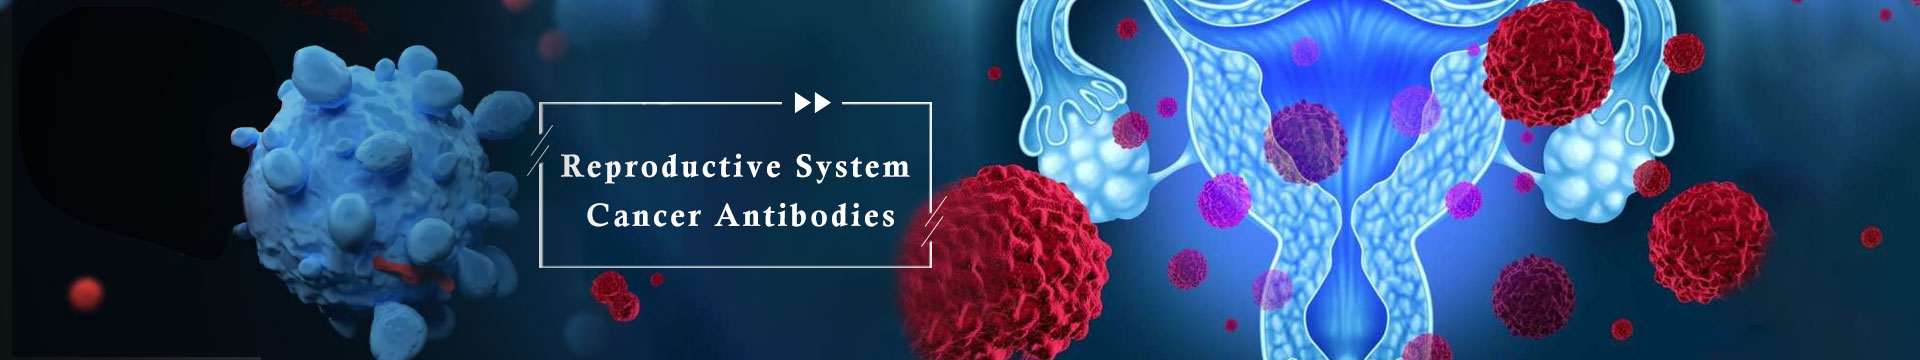 Reproductive System Cancer Antibodies